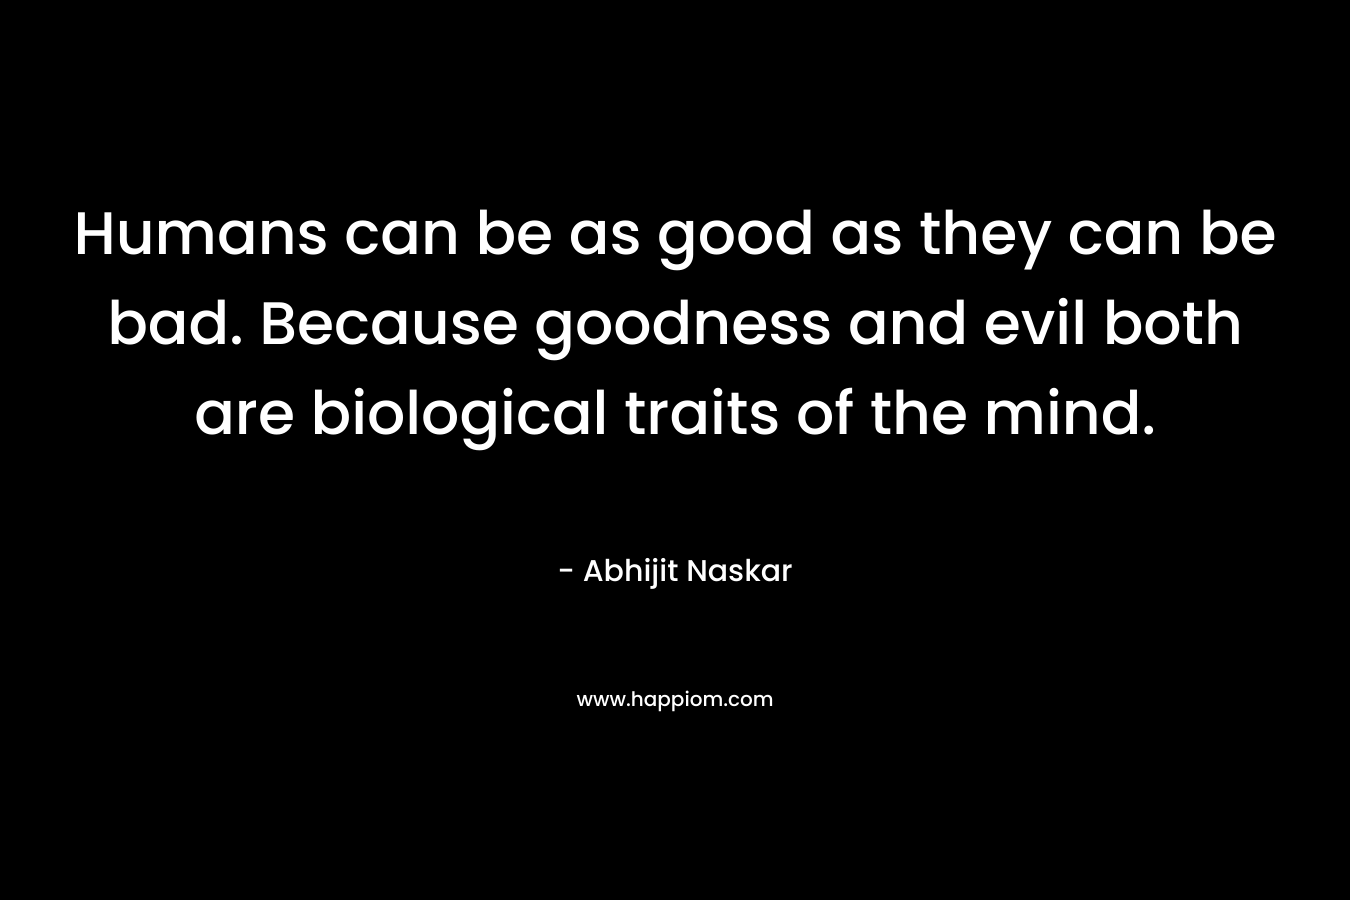 Humans can be as good as they can be bad. Because goodness and evil both are biological traits of the mind.